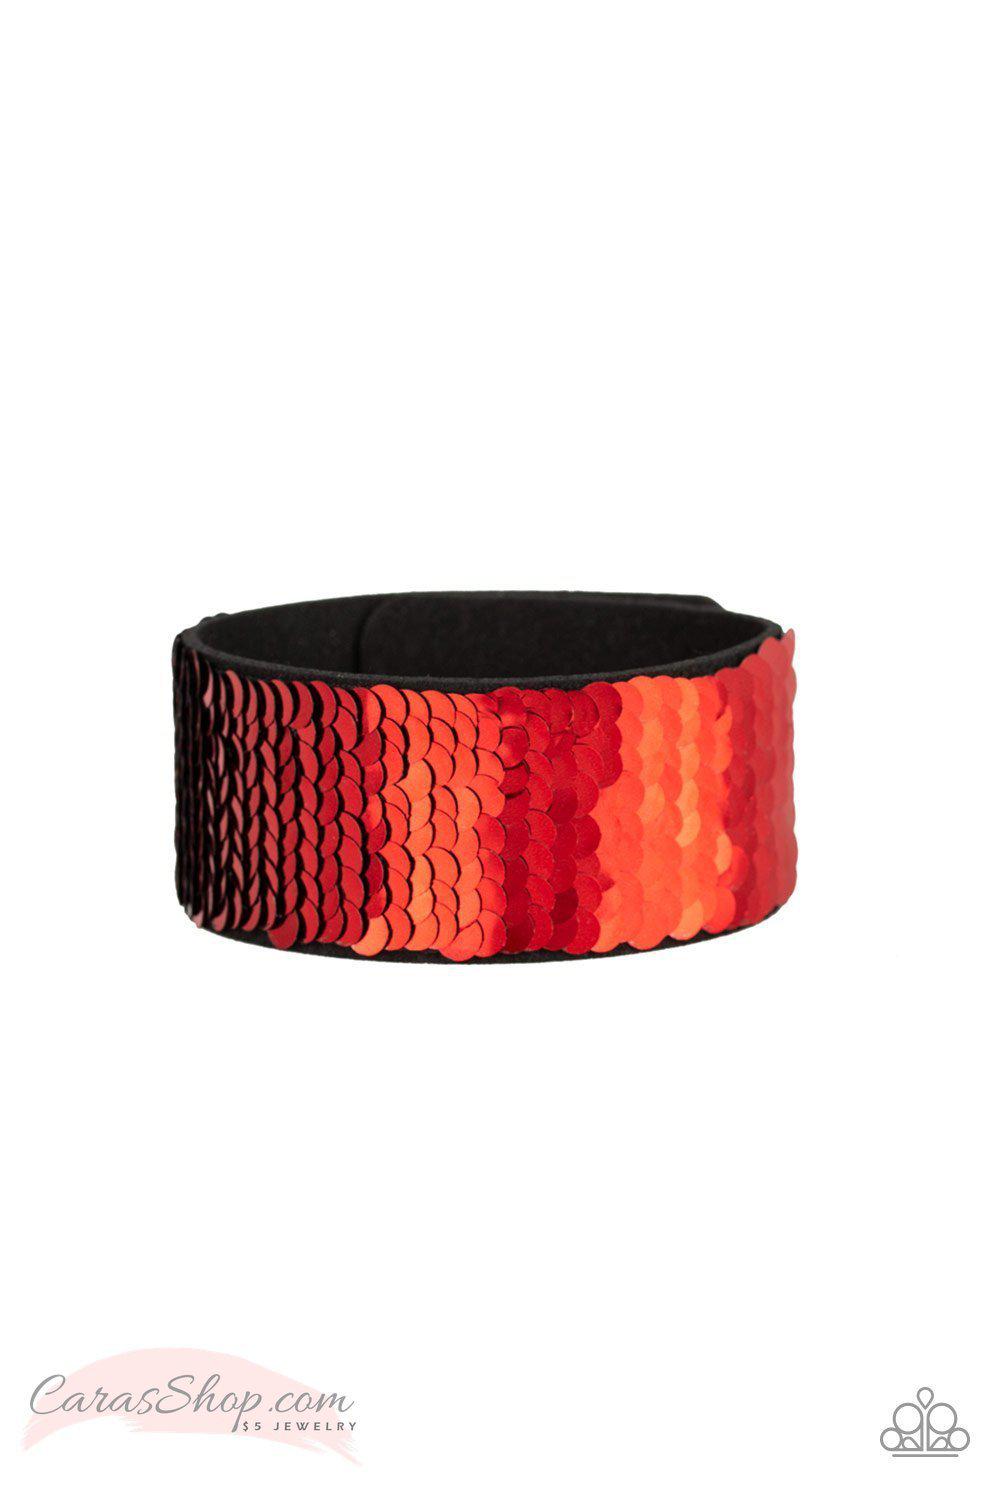 Mer-mazingly Mermaid Red and Black Reversible Sequin Wrap Snap Bracelet - Paparazzi Accessories-CarasShop.com - $5 Jewelry by Cara Jewels